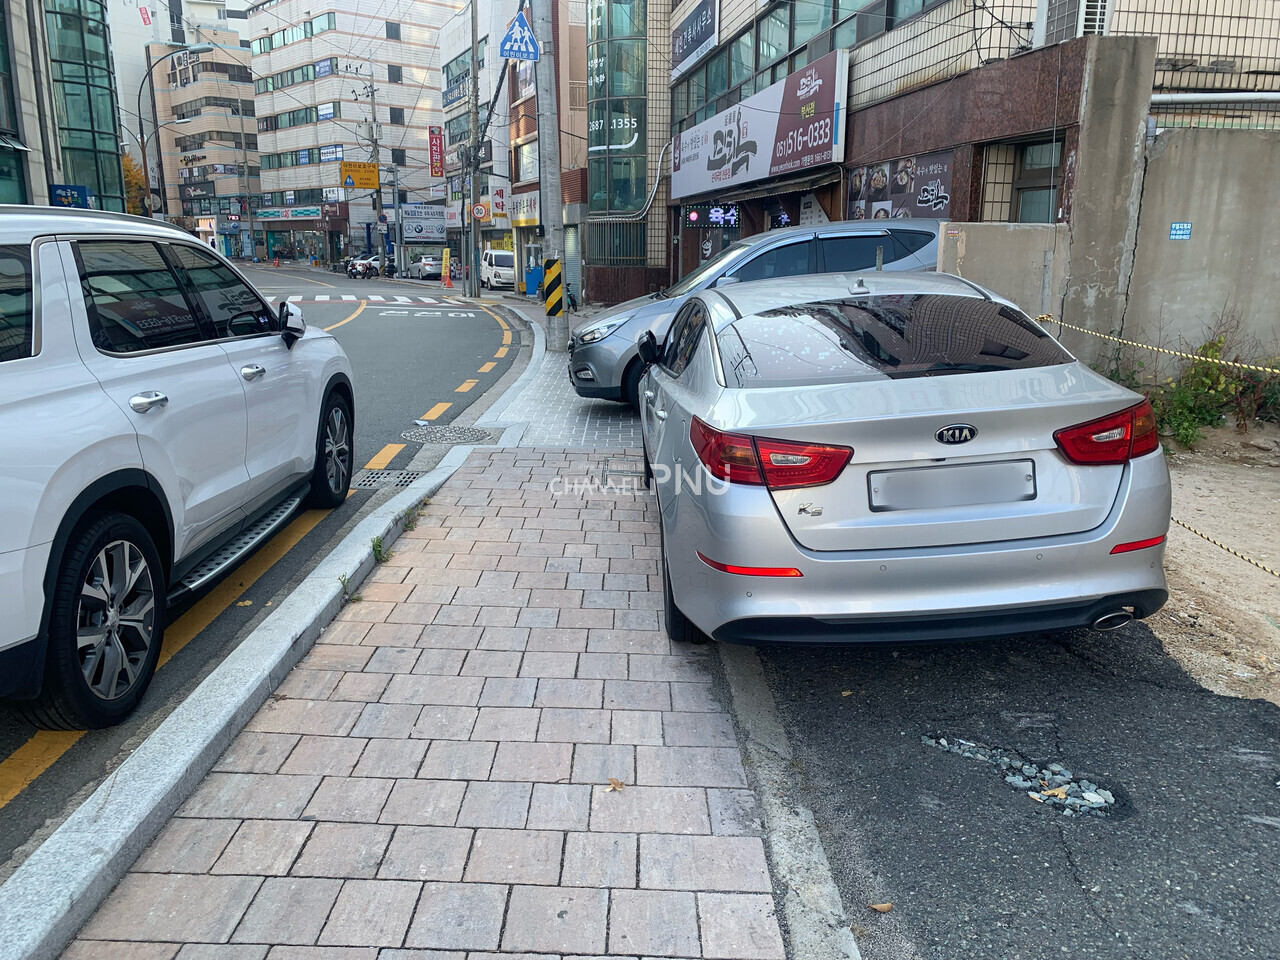 Effective sidewalk width is not secured by protruding parking vehicles [Choi Sun-Woo, Reporter]